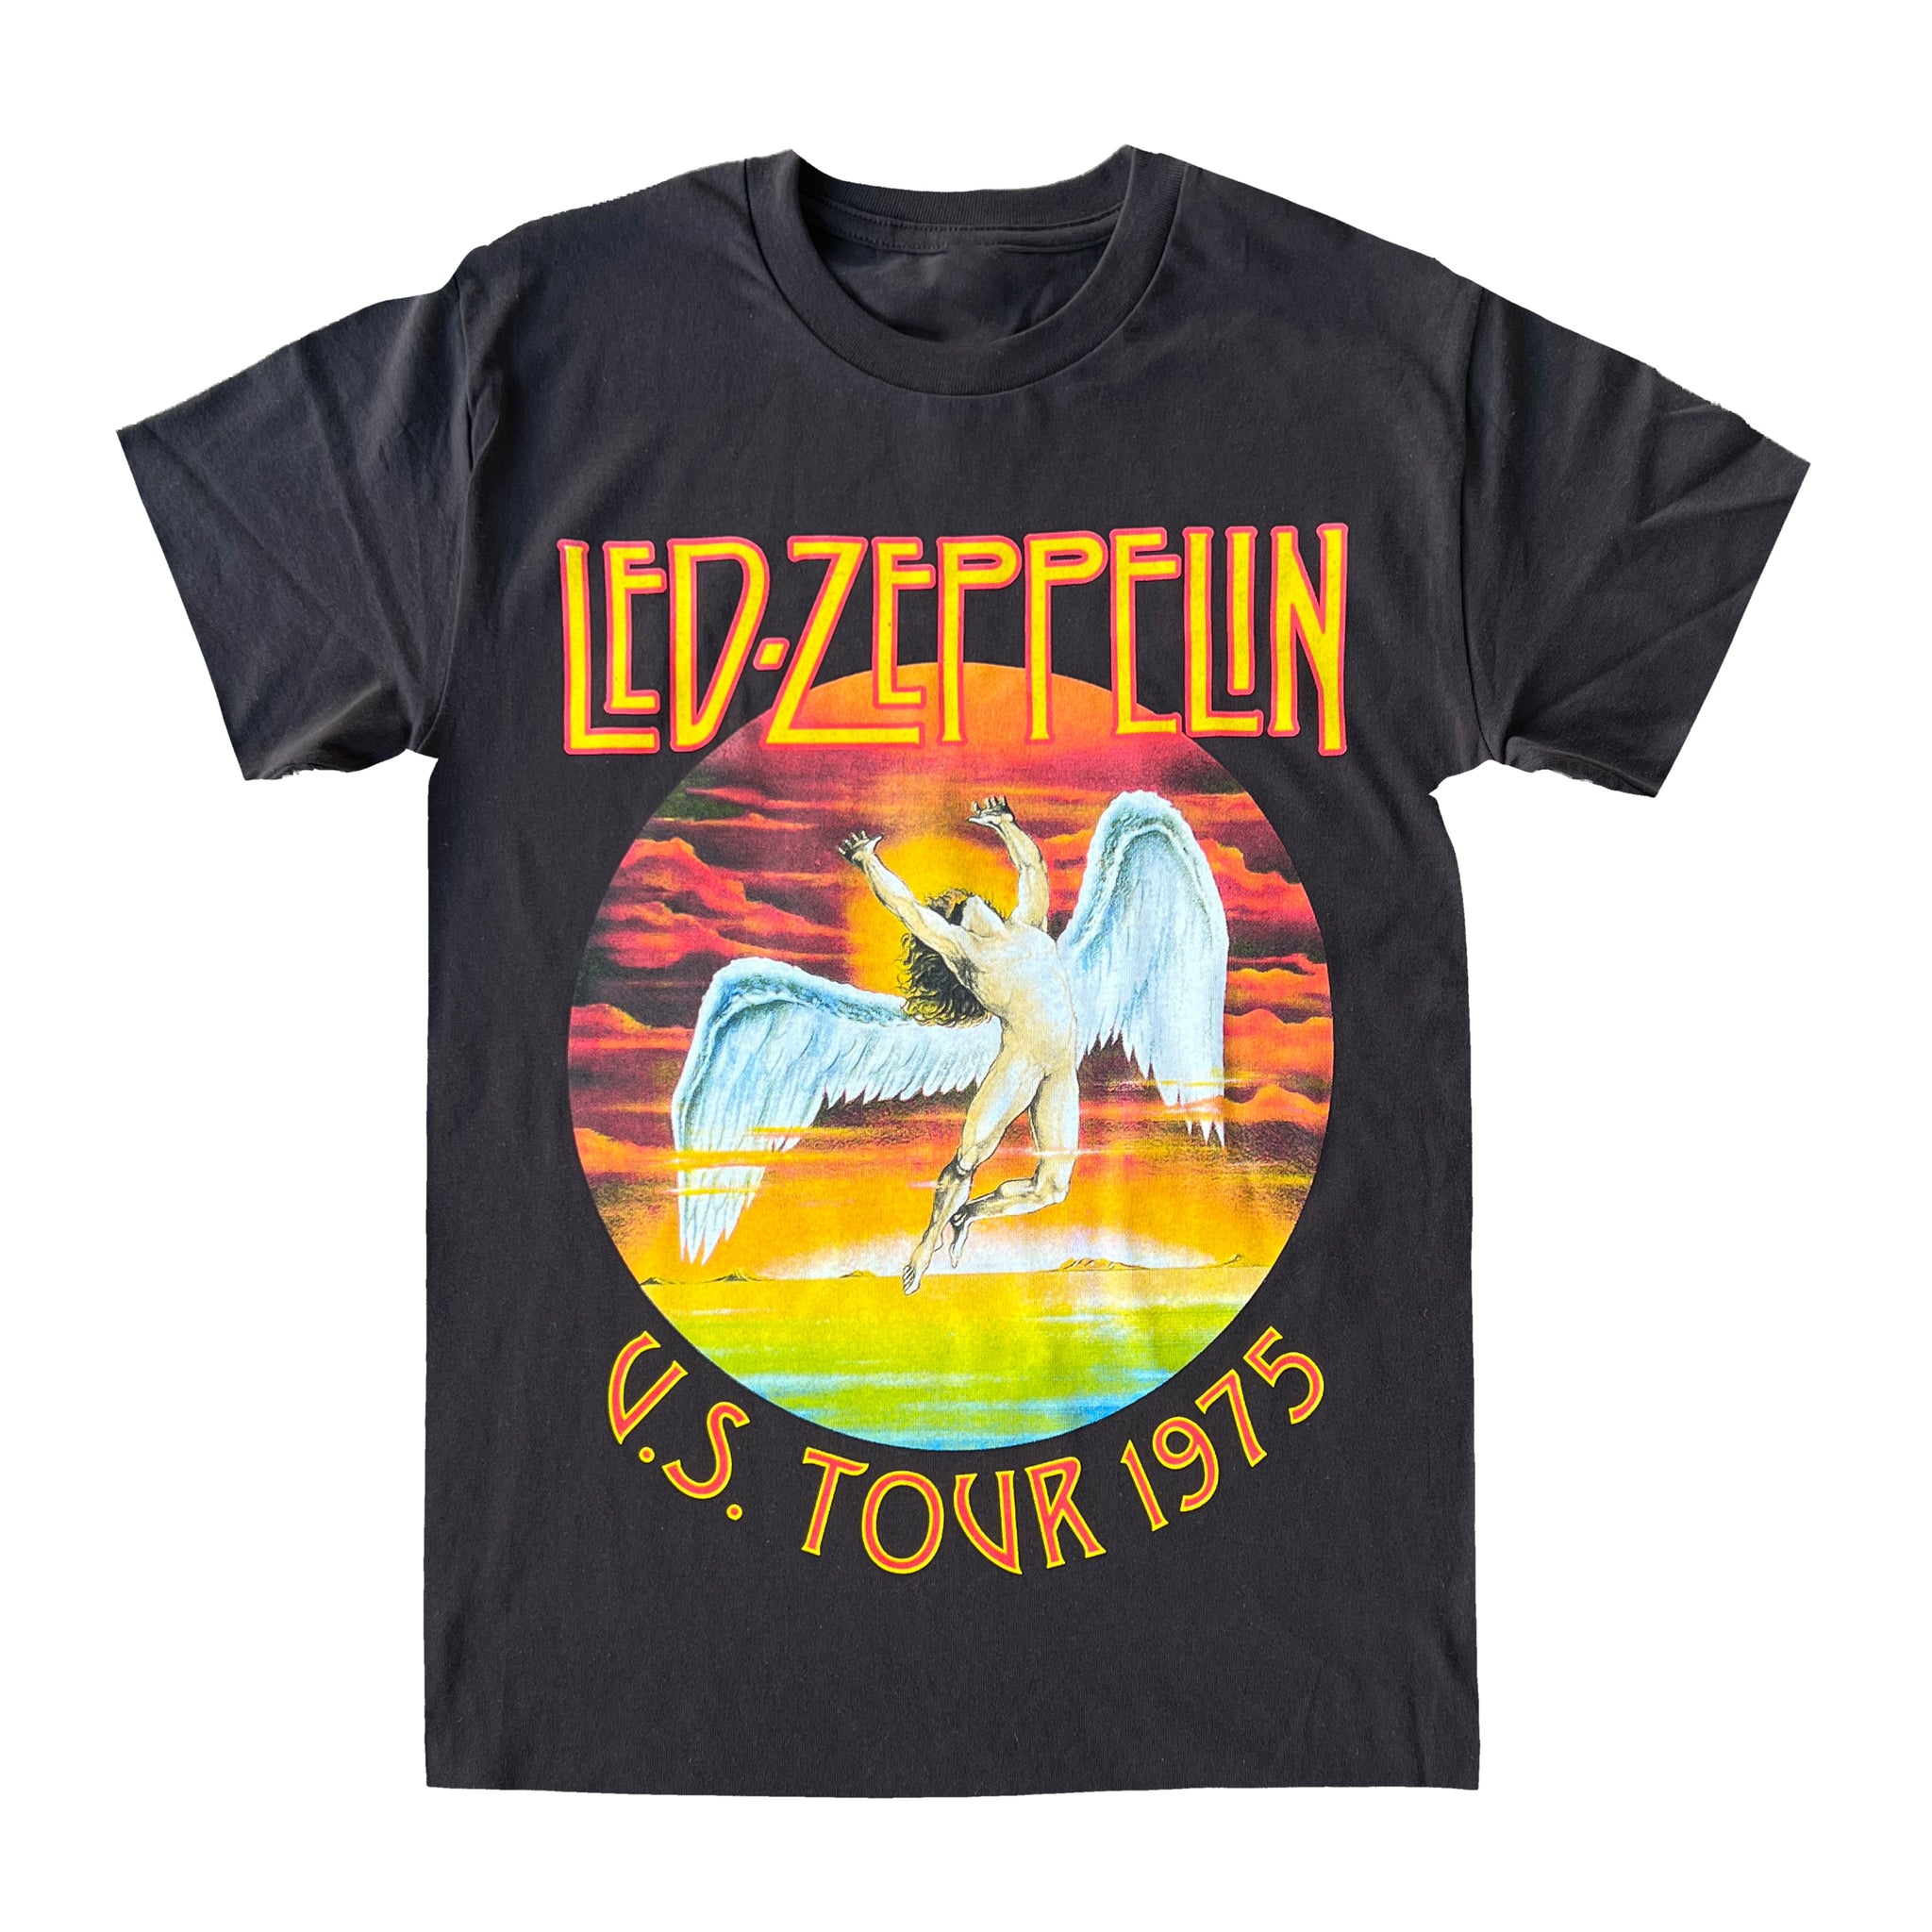 Led Zeppelin Tour 1975 Graphic Tee